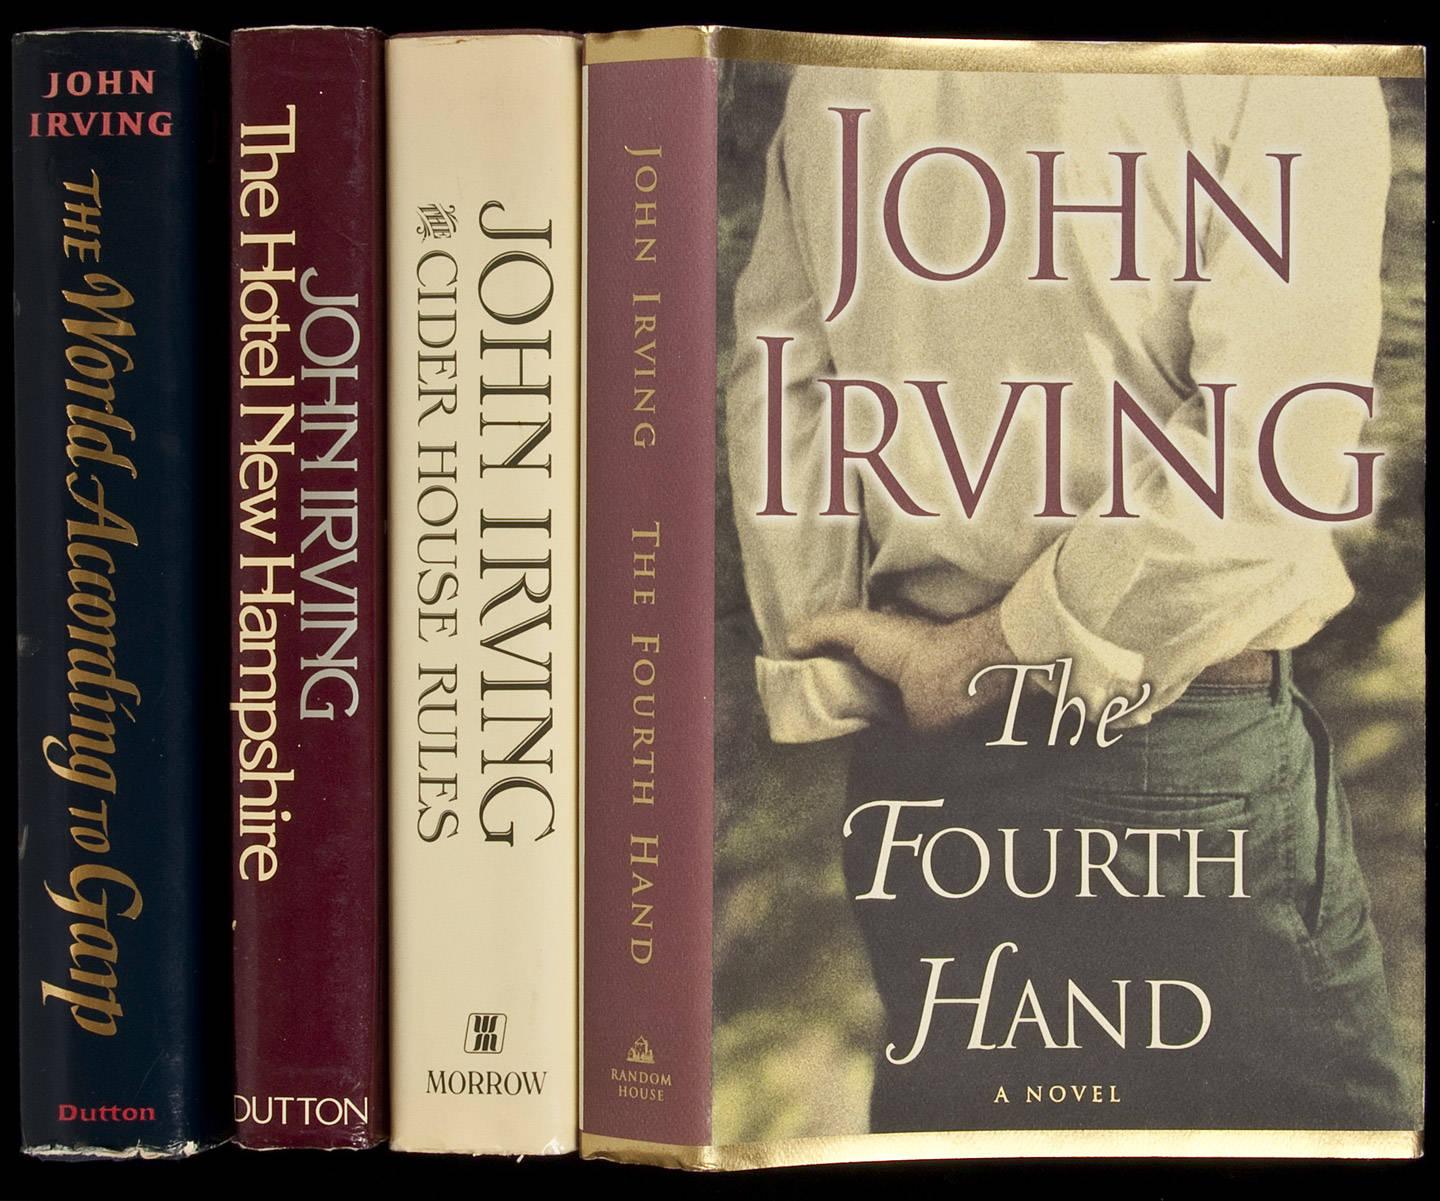 John Irving: Research and Buy First Editions, Limited ...